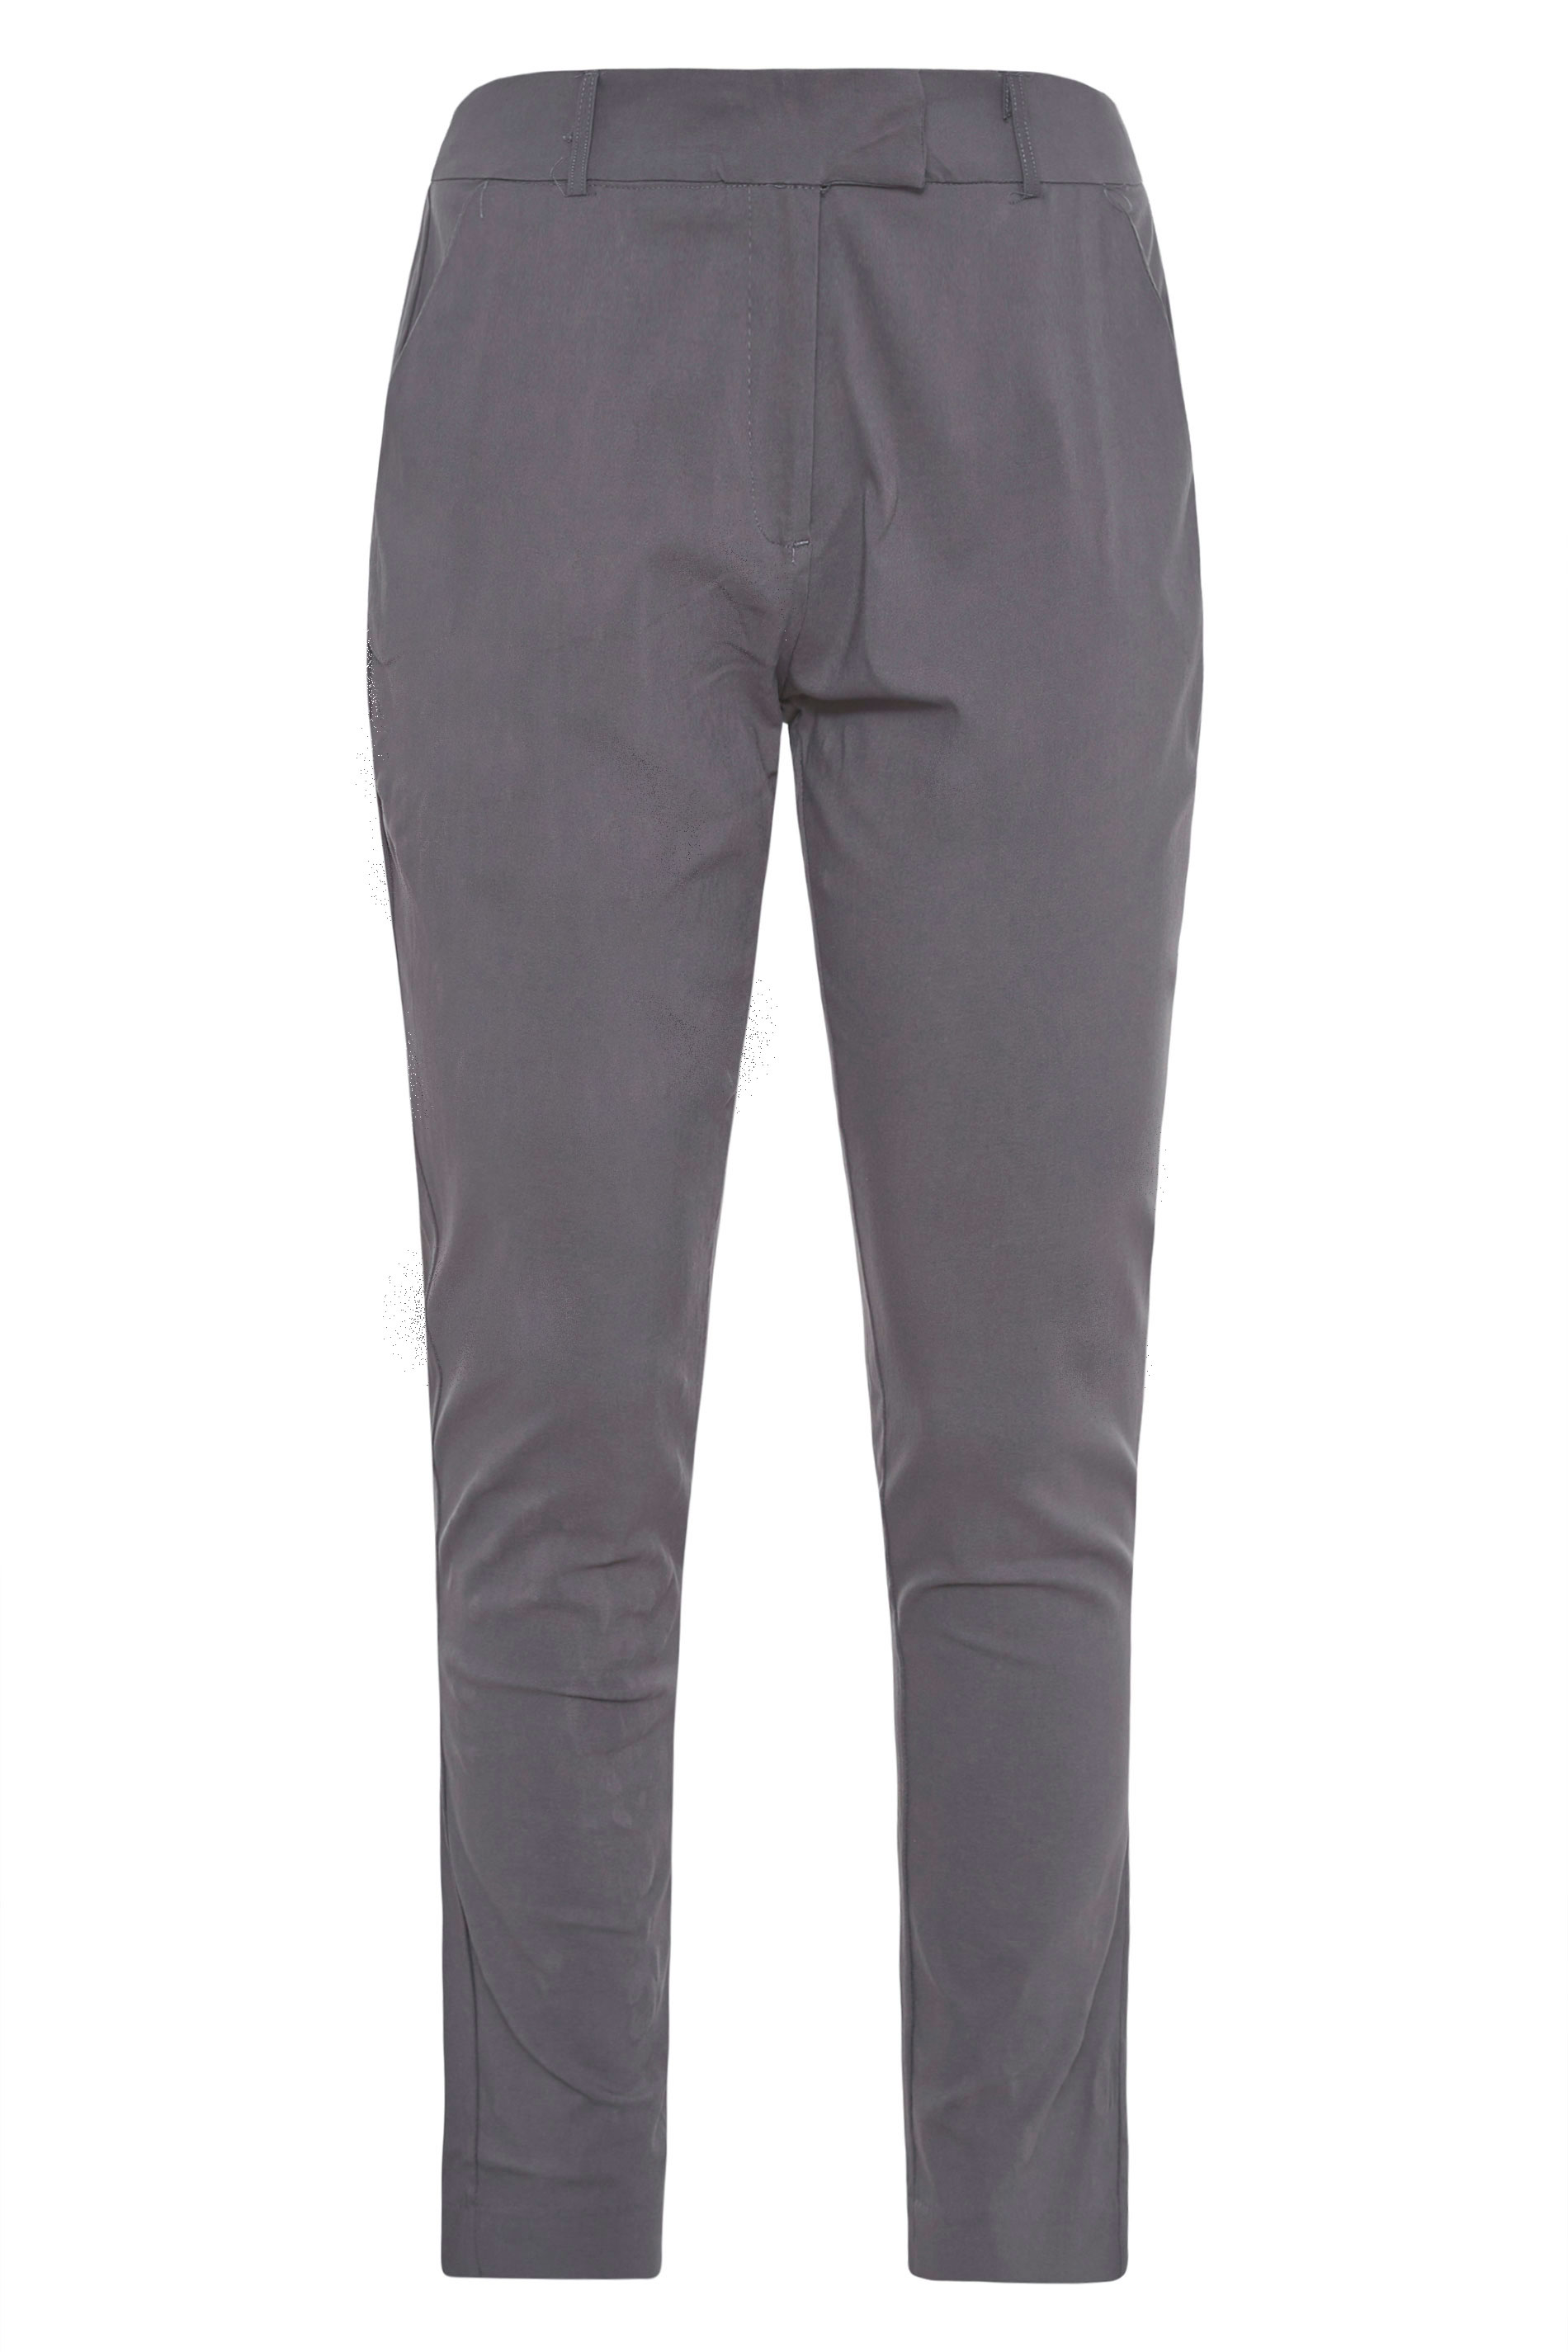 Charcoal Bengaline Stretch Trousers | Yours Clothing